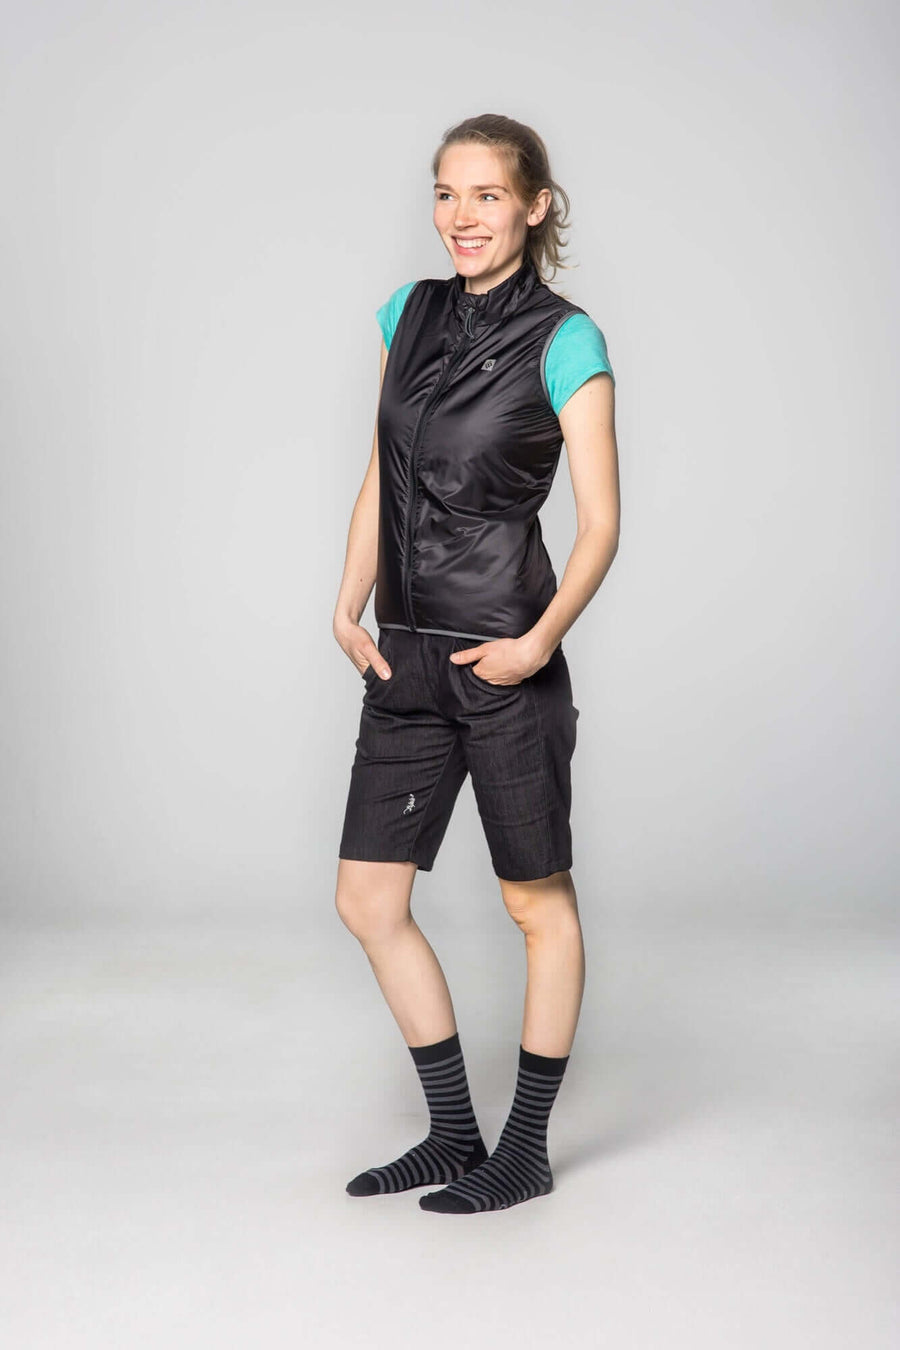 Women‘s - DUUNSOOL Een Westen % OUTLET ARCHIV 1st Edt. 2nd Edt. Anthracite Herbst / Winter Jacken & Westen L Lavalan Wool Insulation M Merino Mountainbike PFC Free PRO - Tight - Race Cut Recycled Polyester Road & Gravel S spo-default spo-disabled spo-notify-me-disabled tops Urban & E-Bike Winter-Guide315 Women XS